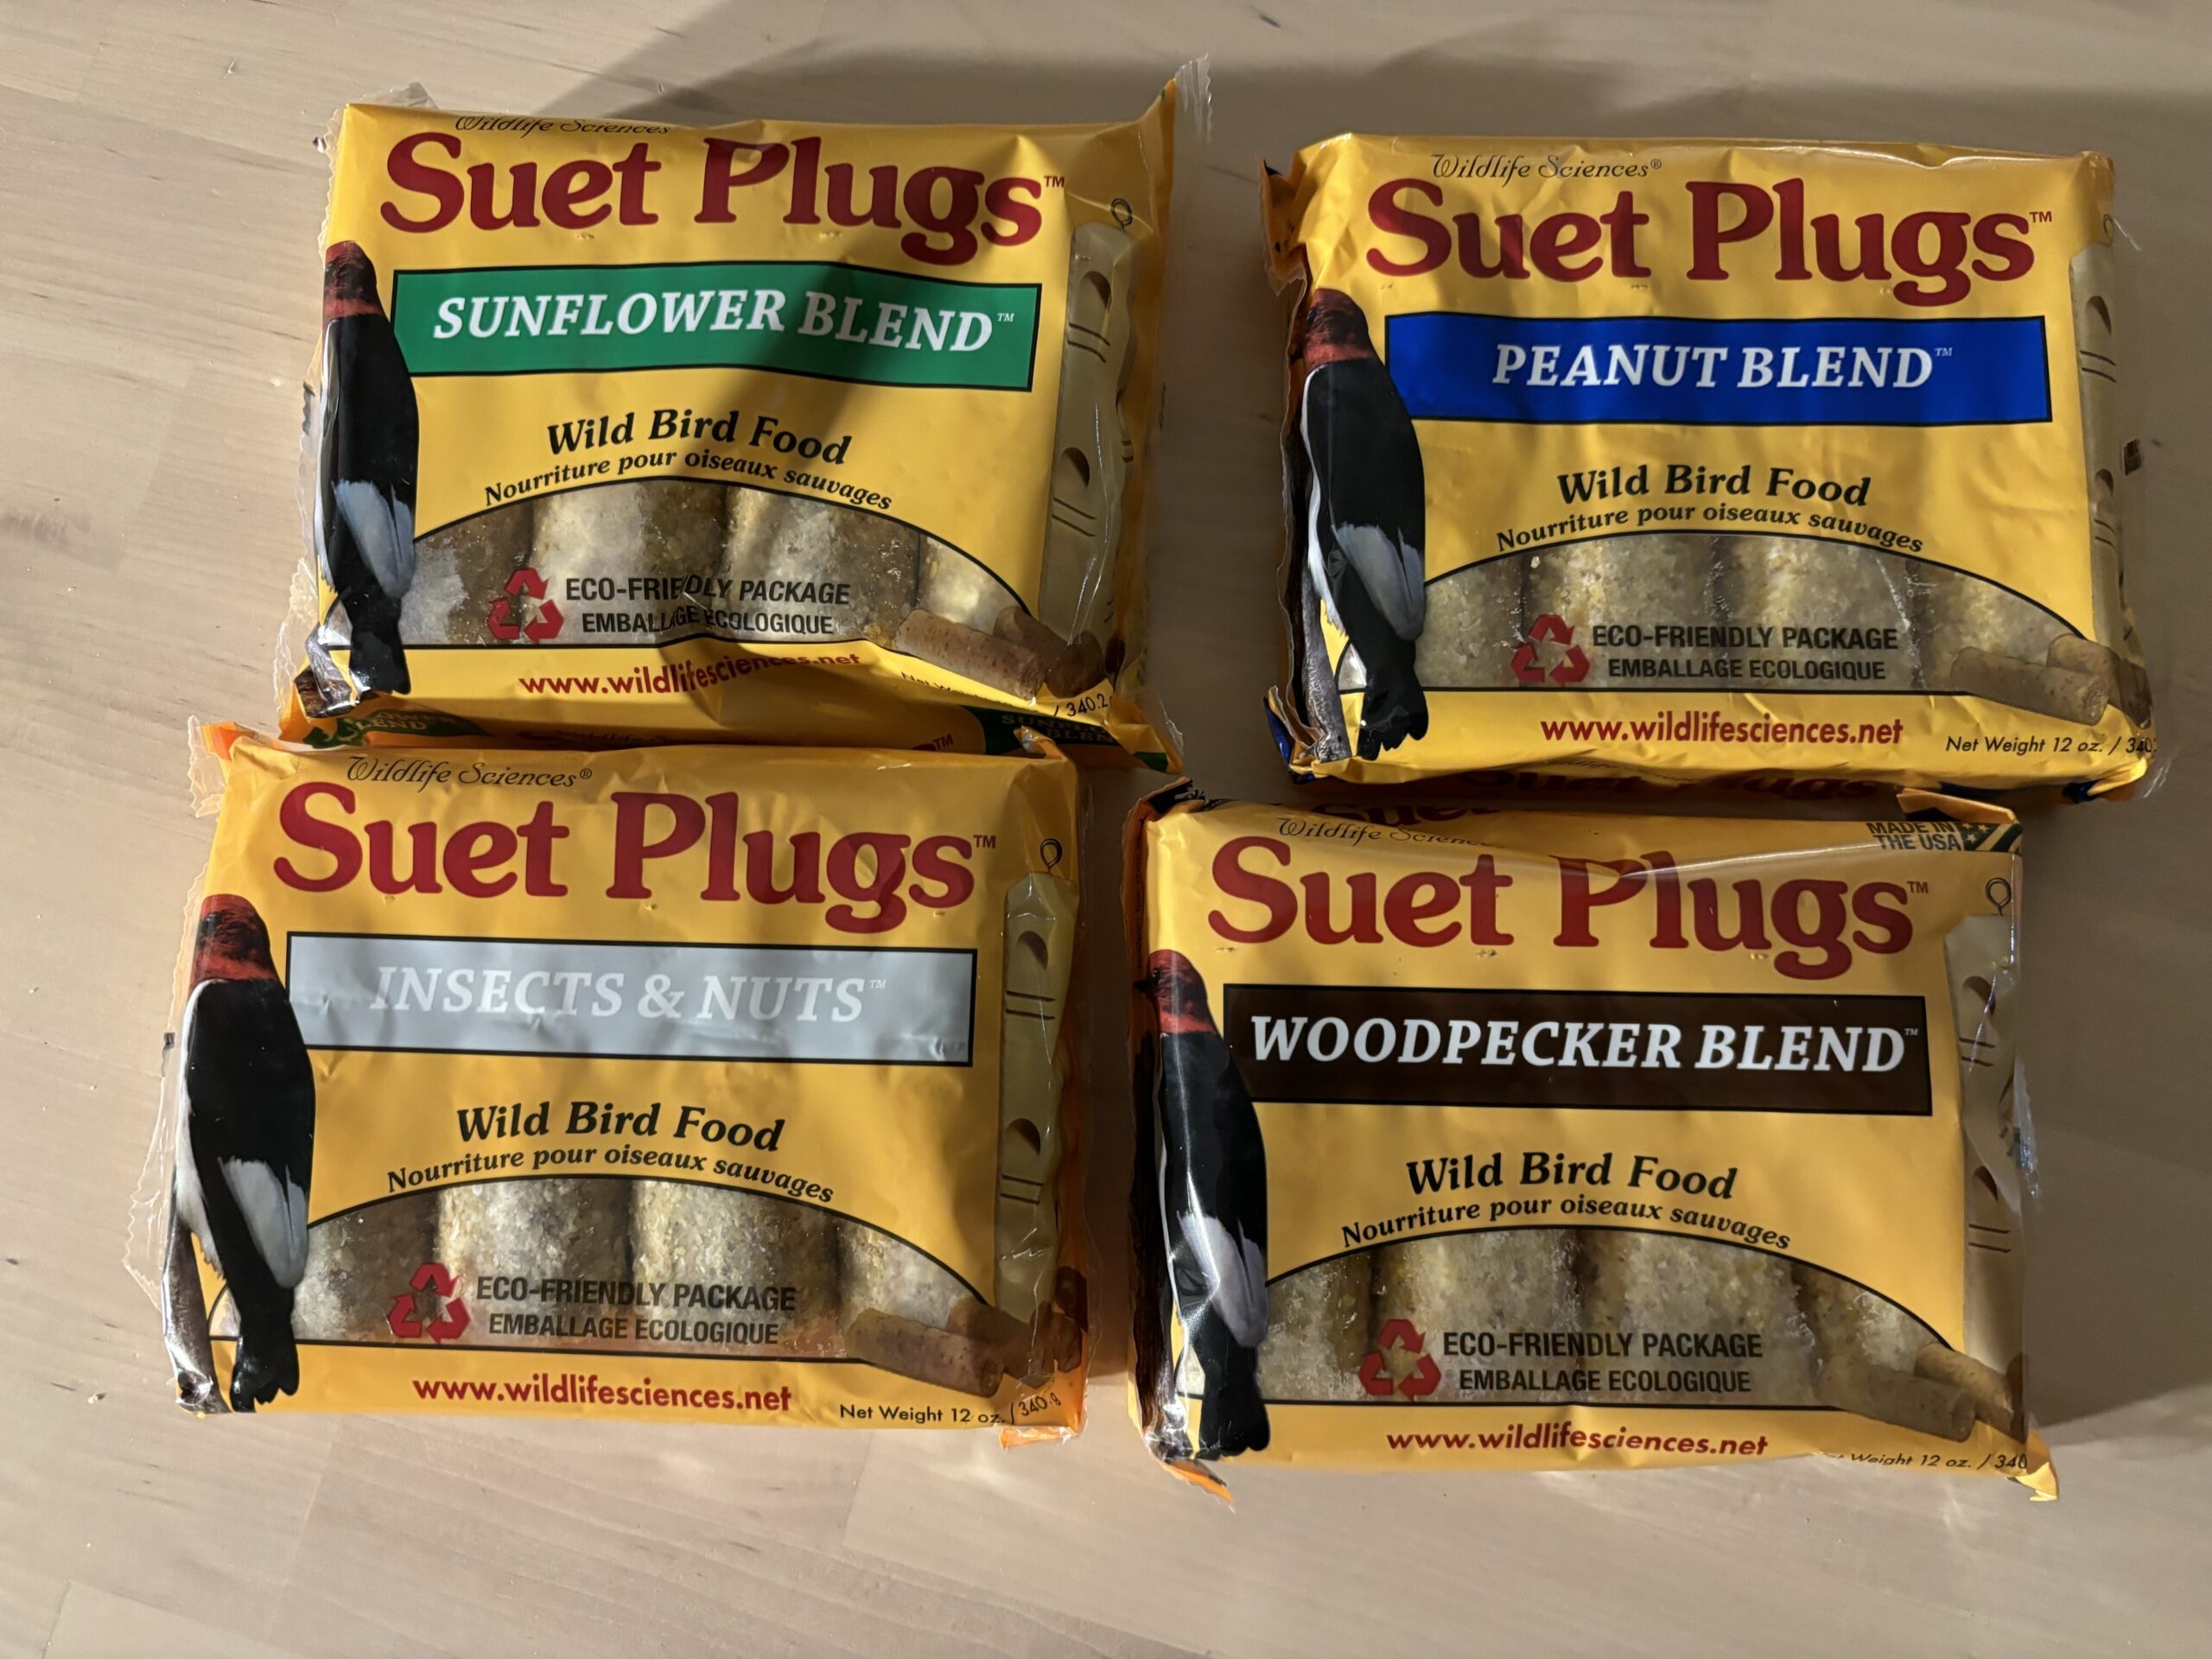 Review: This Suet Plugs Variety Pack is Great for Woodpeckers